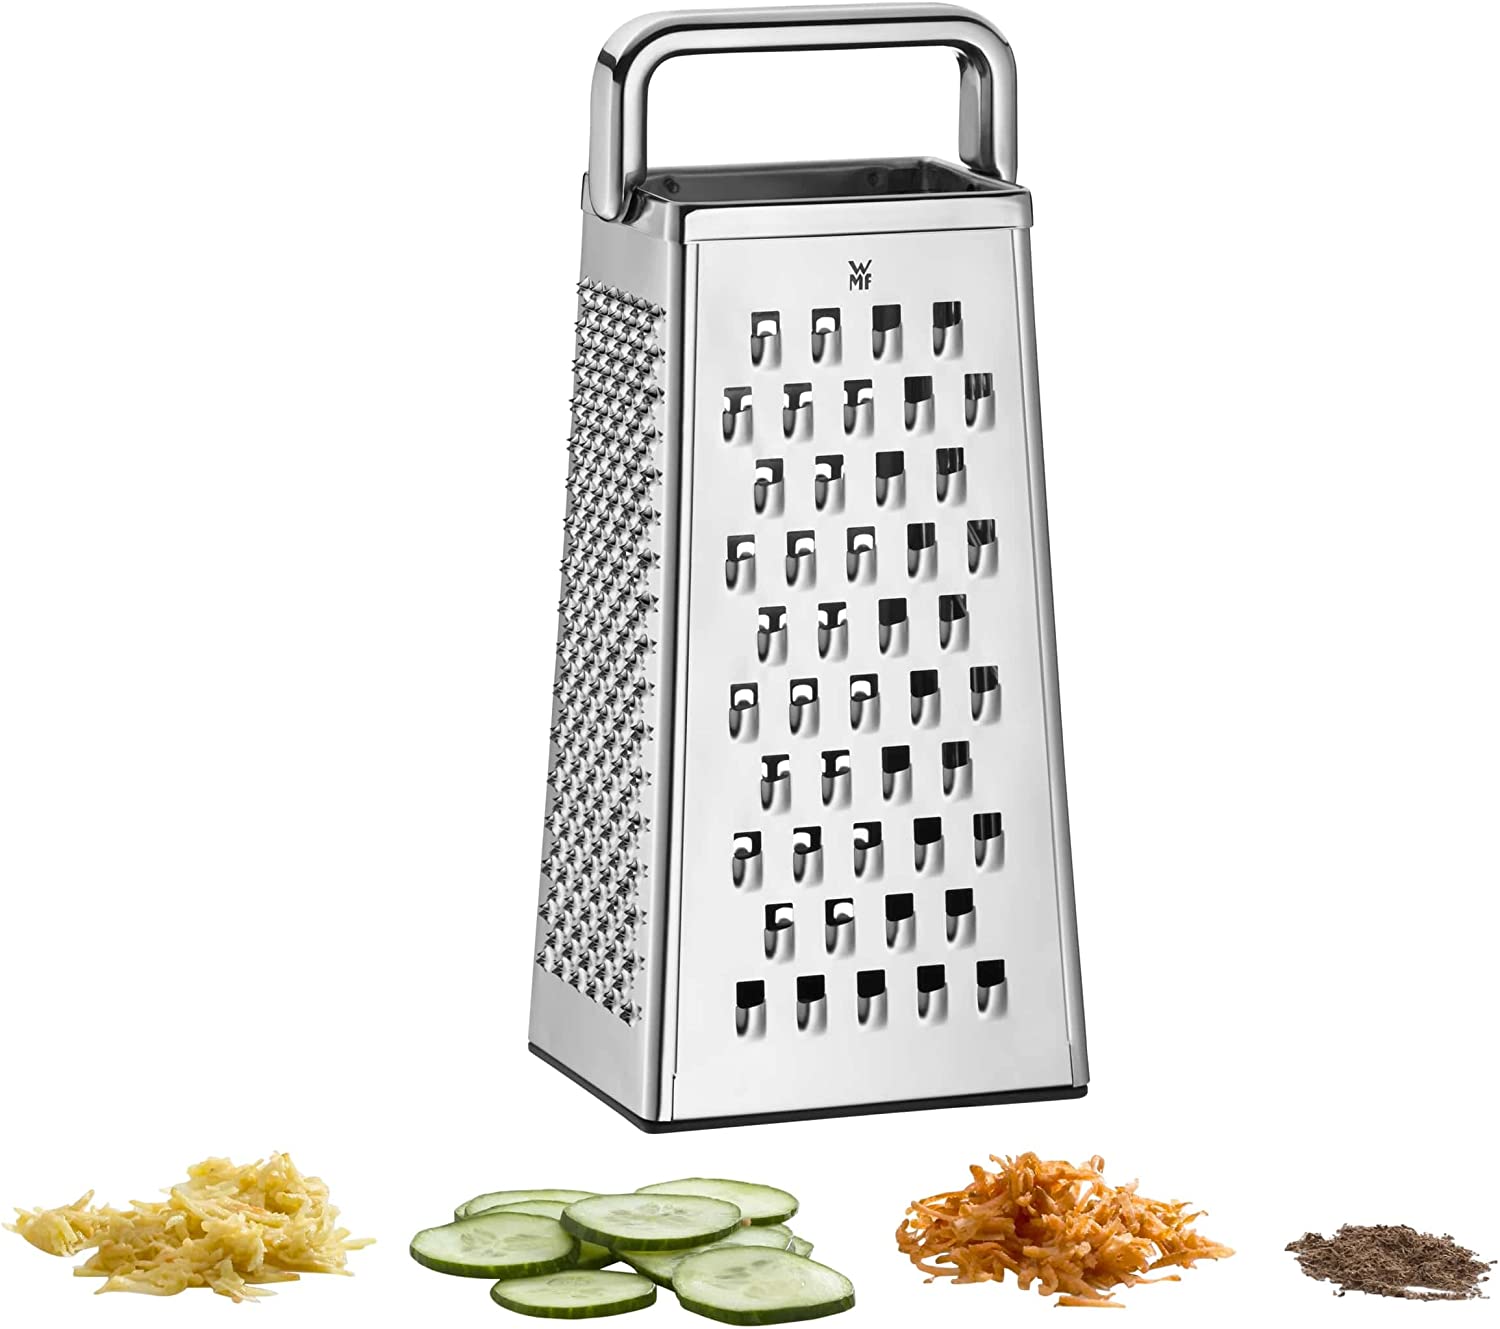 WMF 686076040 Rectangular Cheese Grater Top Tools